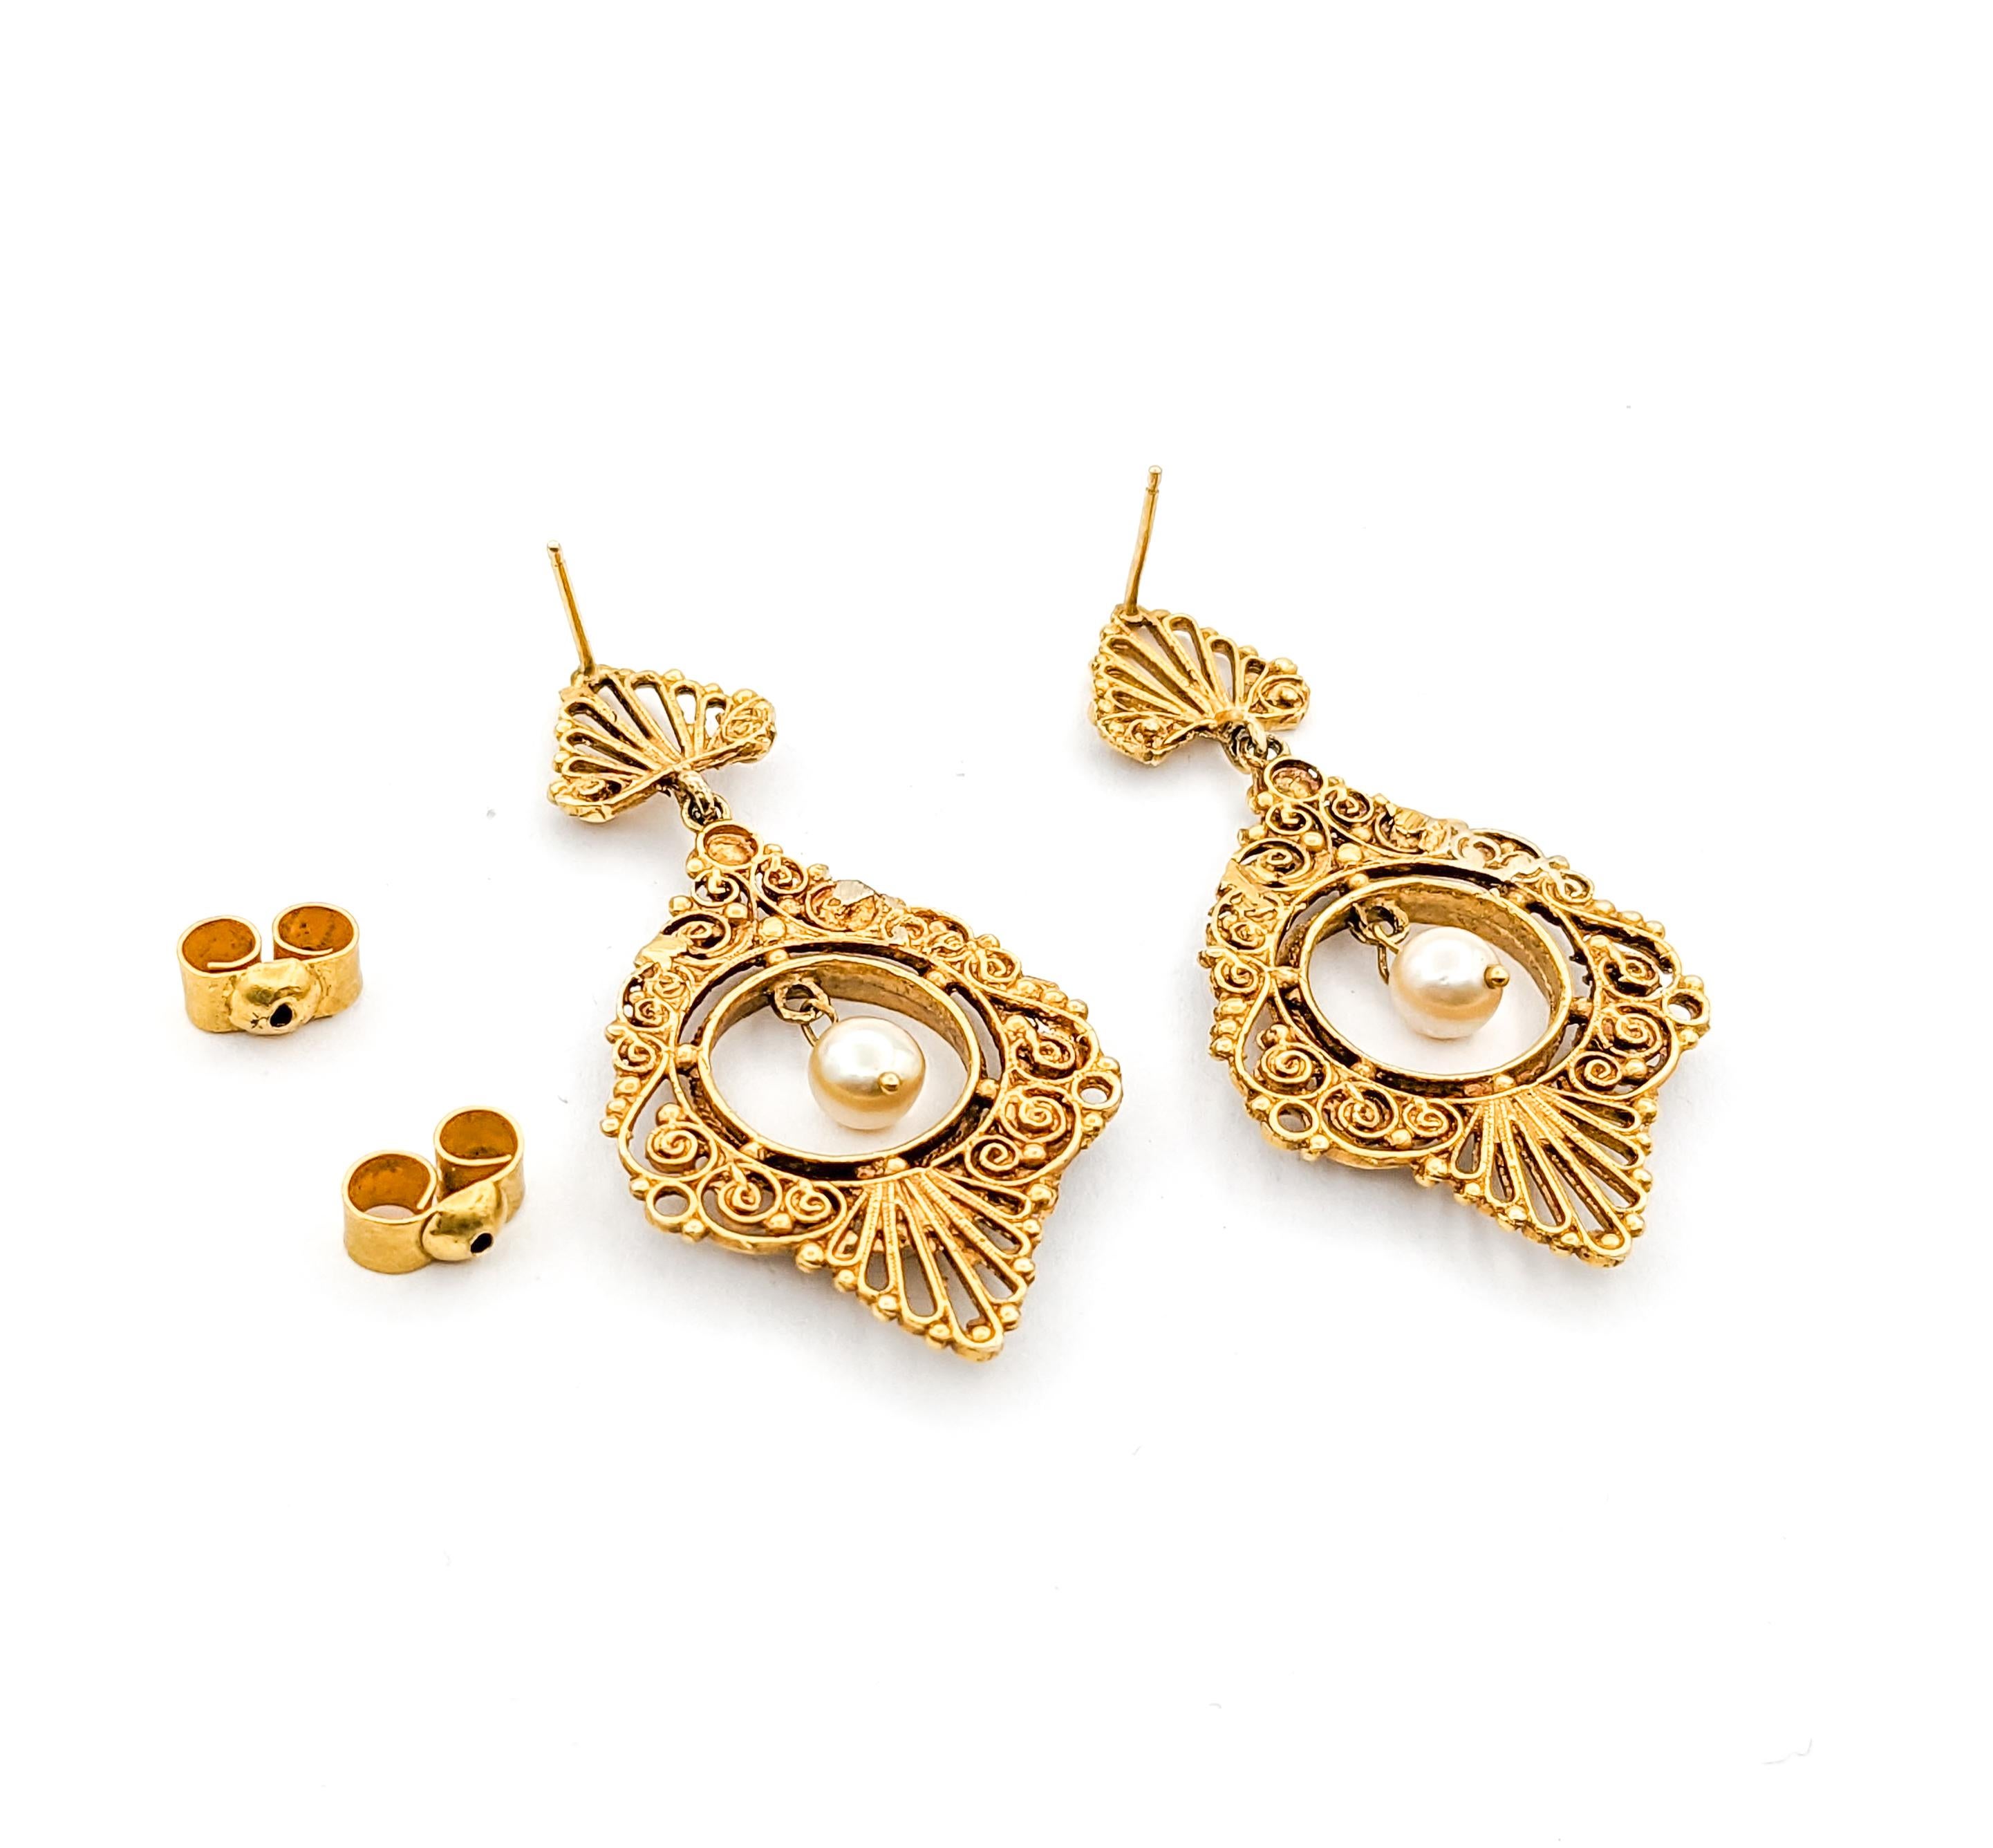 Round Cut Romantic Vintage Filigree Pearl Drop Earrings in Yellow Gold For Sale